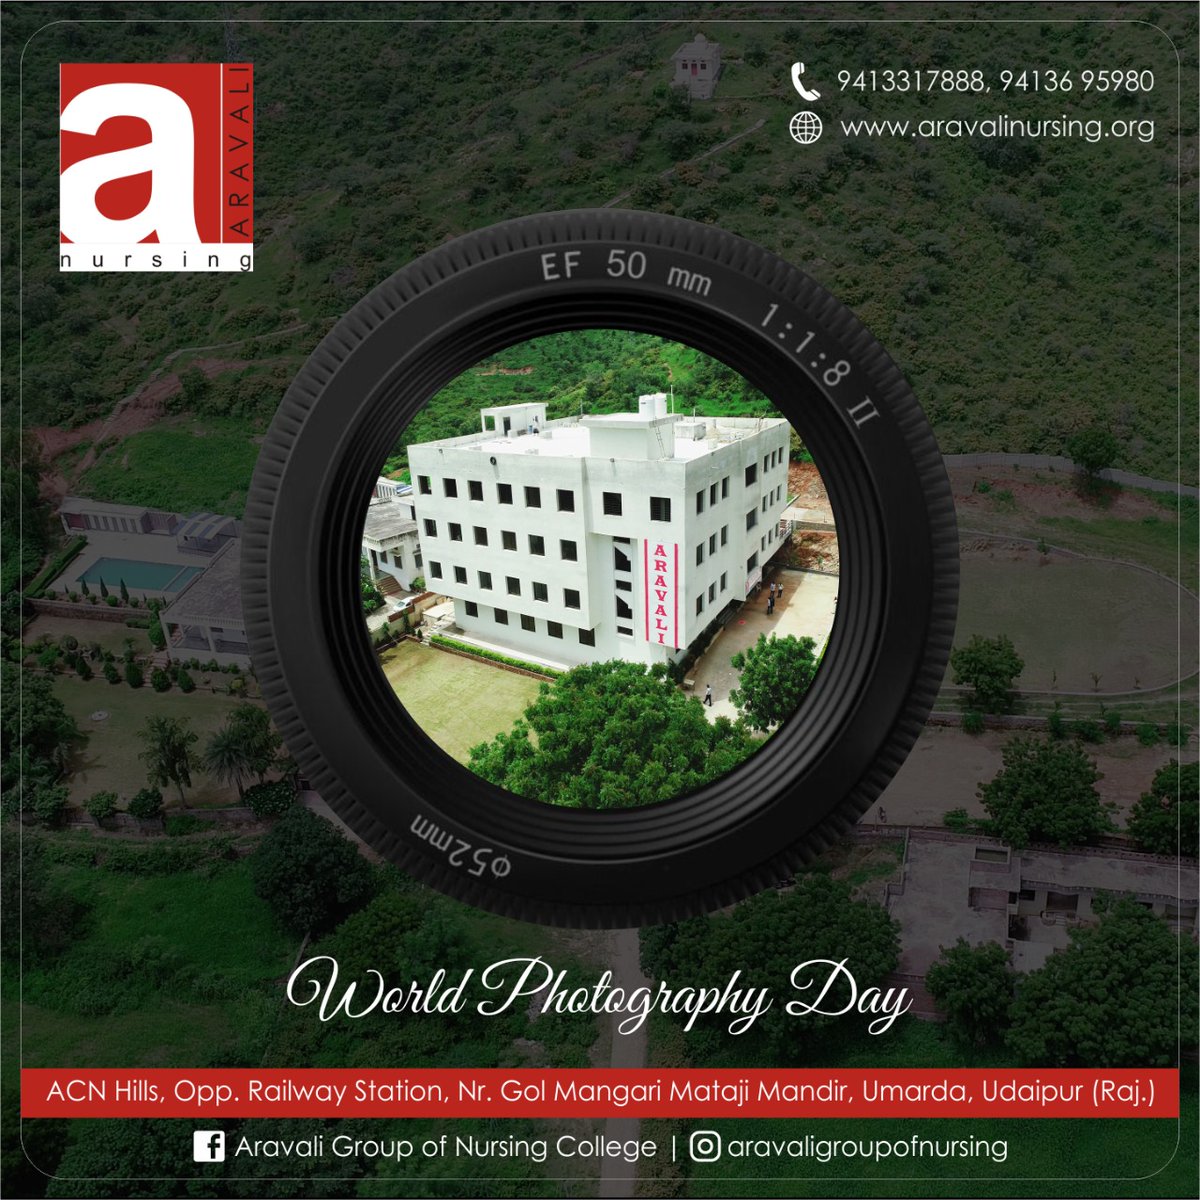 They say a picture is worth a thousand words, but this was worth a thousand emotions. 

Happy World Photography Day!!!

#WorldPhotographyDay #photography #BScNursing #nursing #nurse #studentlife #students #nurses #nurserock #generalnursing #aravaligroupofnursingcolleges #udaipur